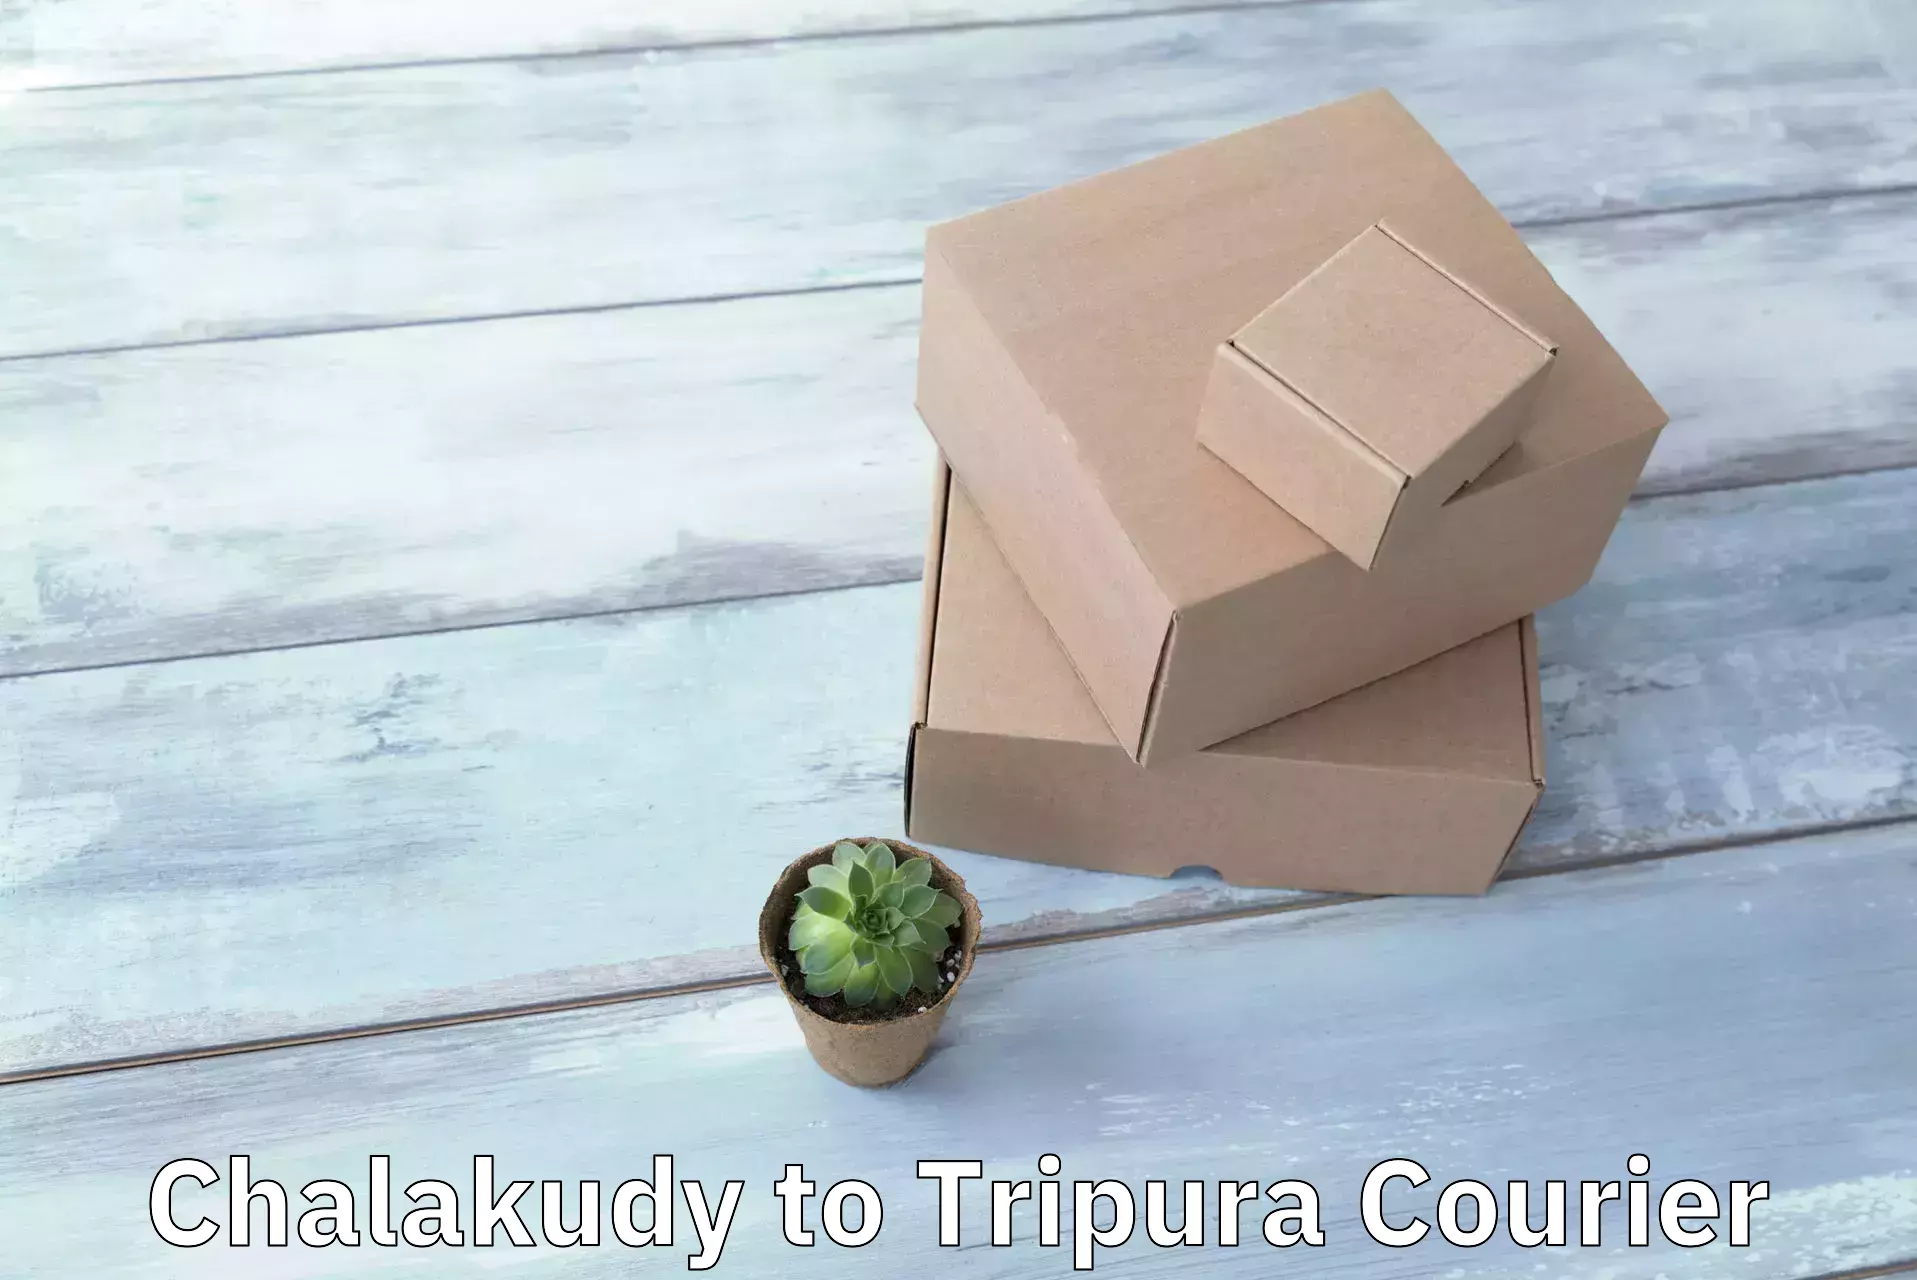 Cash on delivery service Chalakudy to Tripura